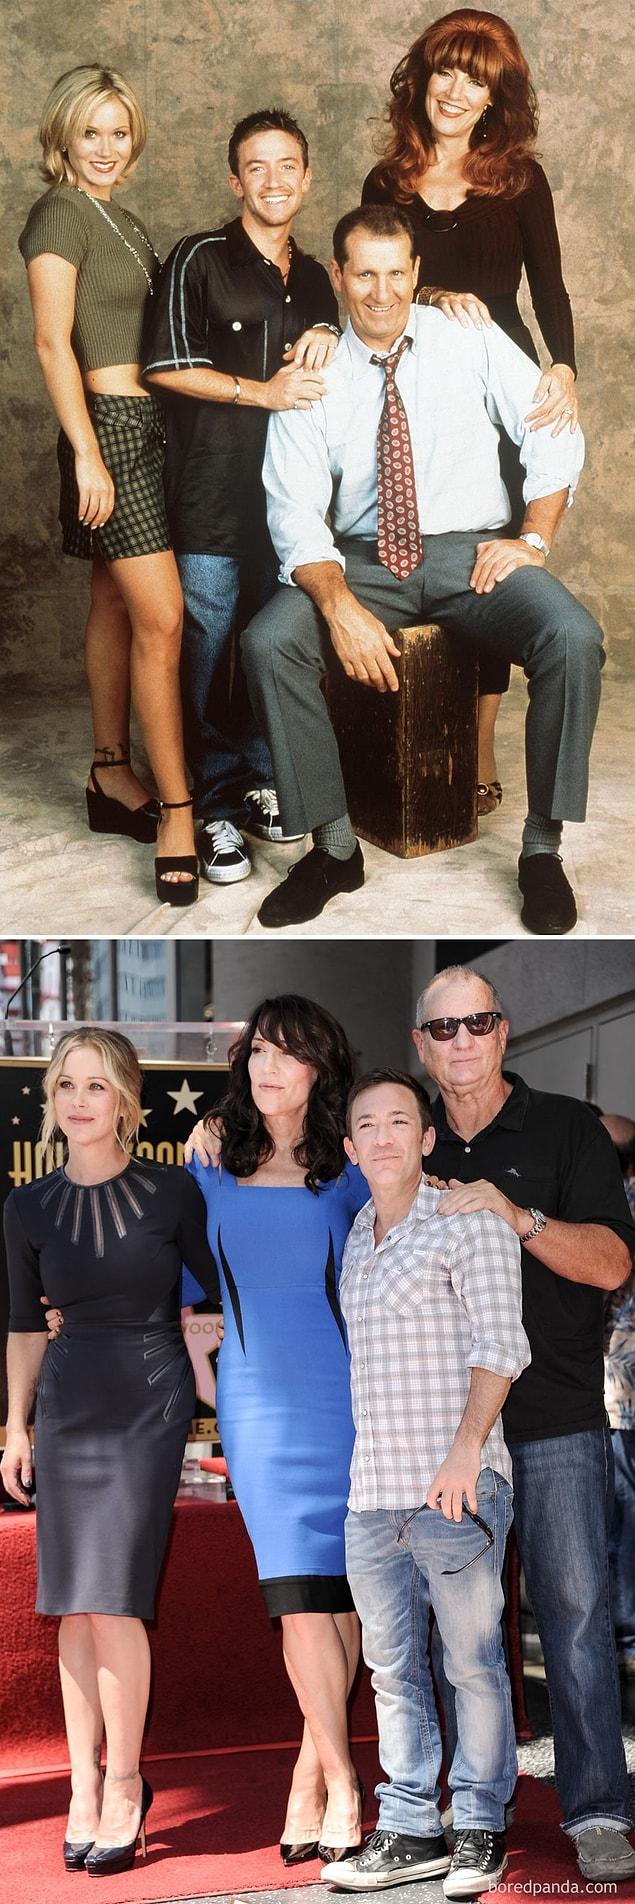 17. Married With Children 1987 Vs. 2014